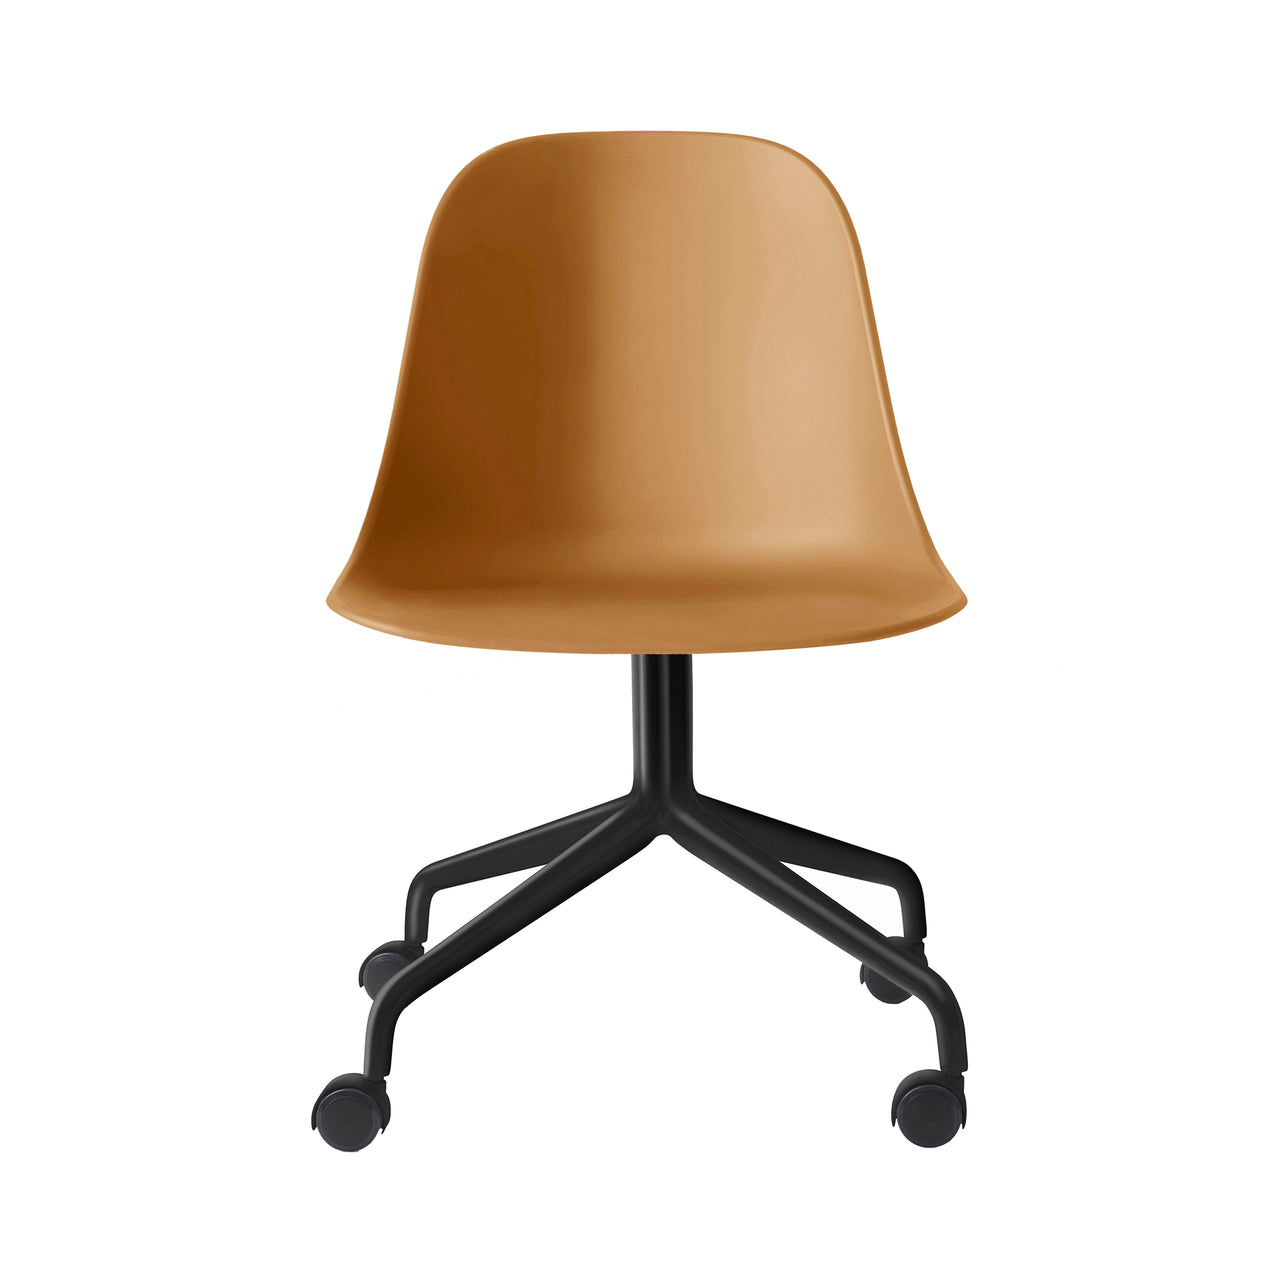 Harbour Side Chair Star Base with Casters: Khaki